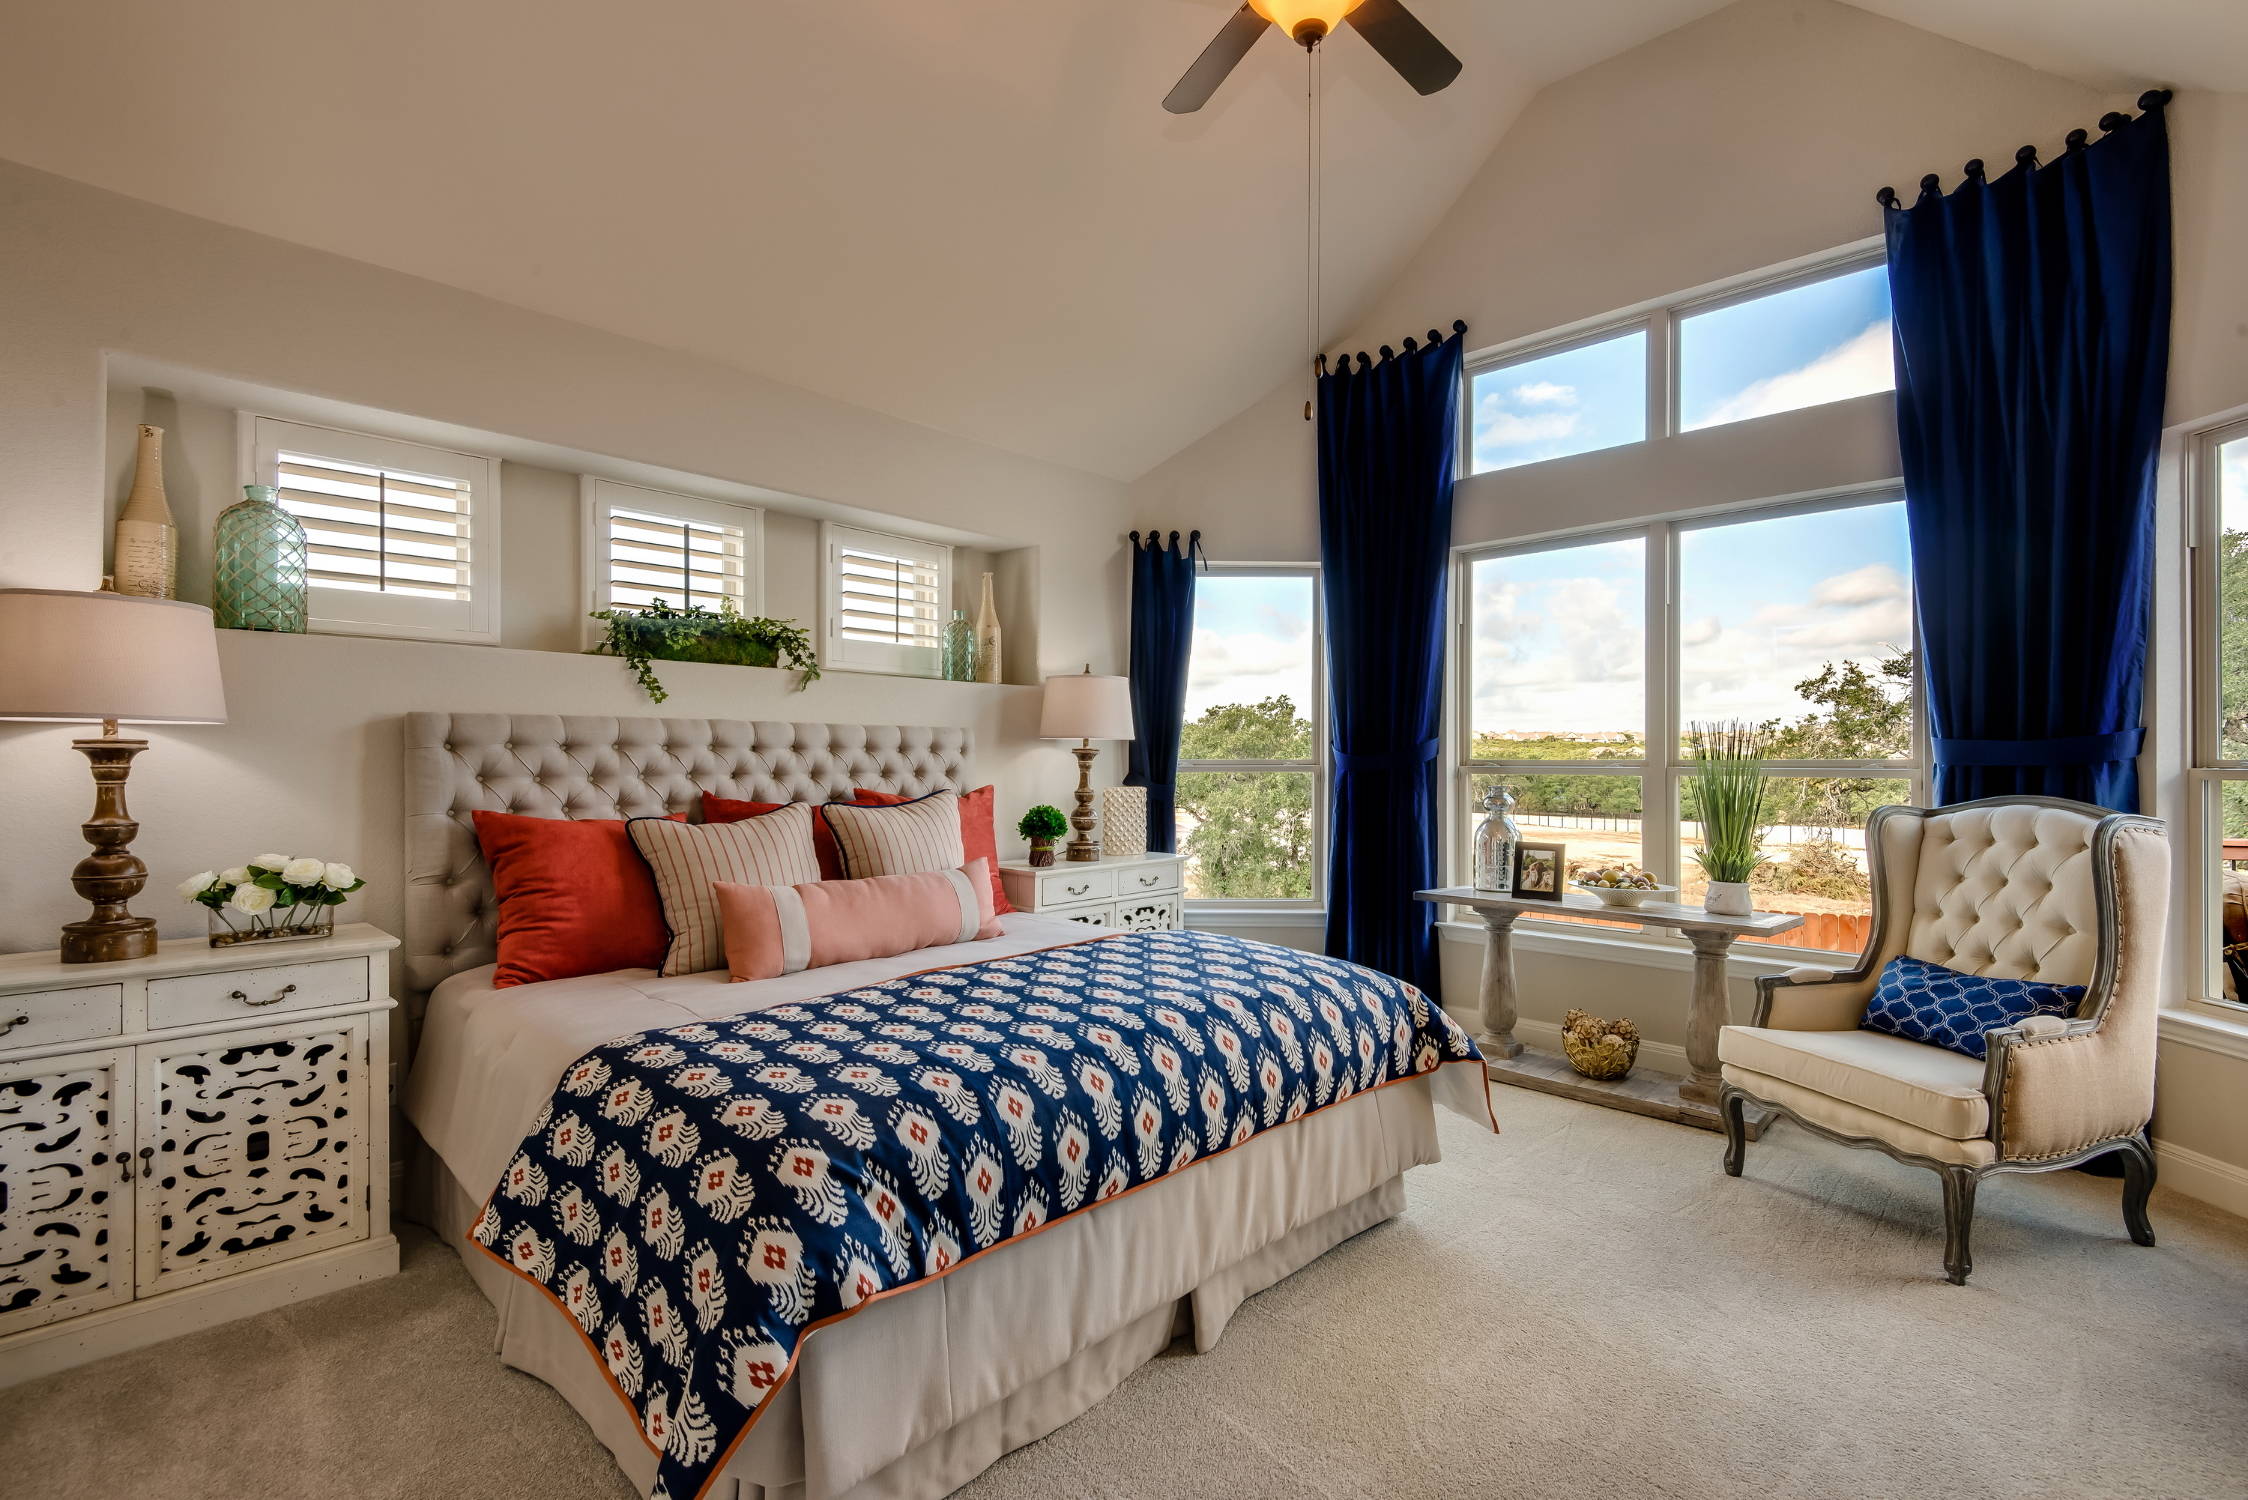 Nice teal and coral bedroom ideas Blue And Coral Bedroom Ideas Photos Houzz